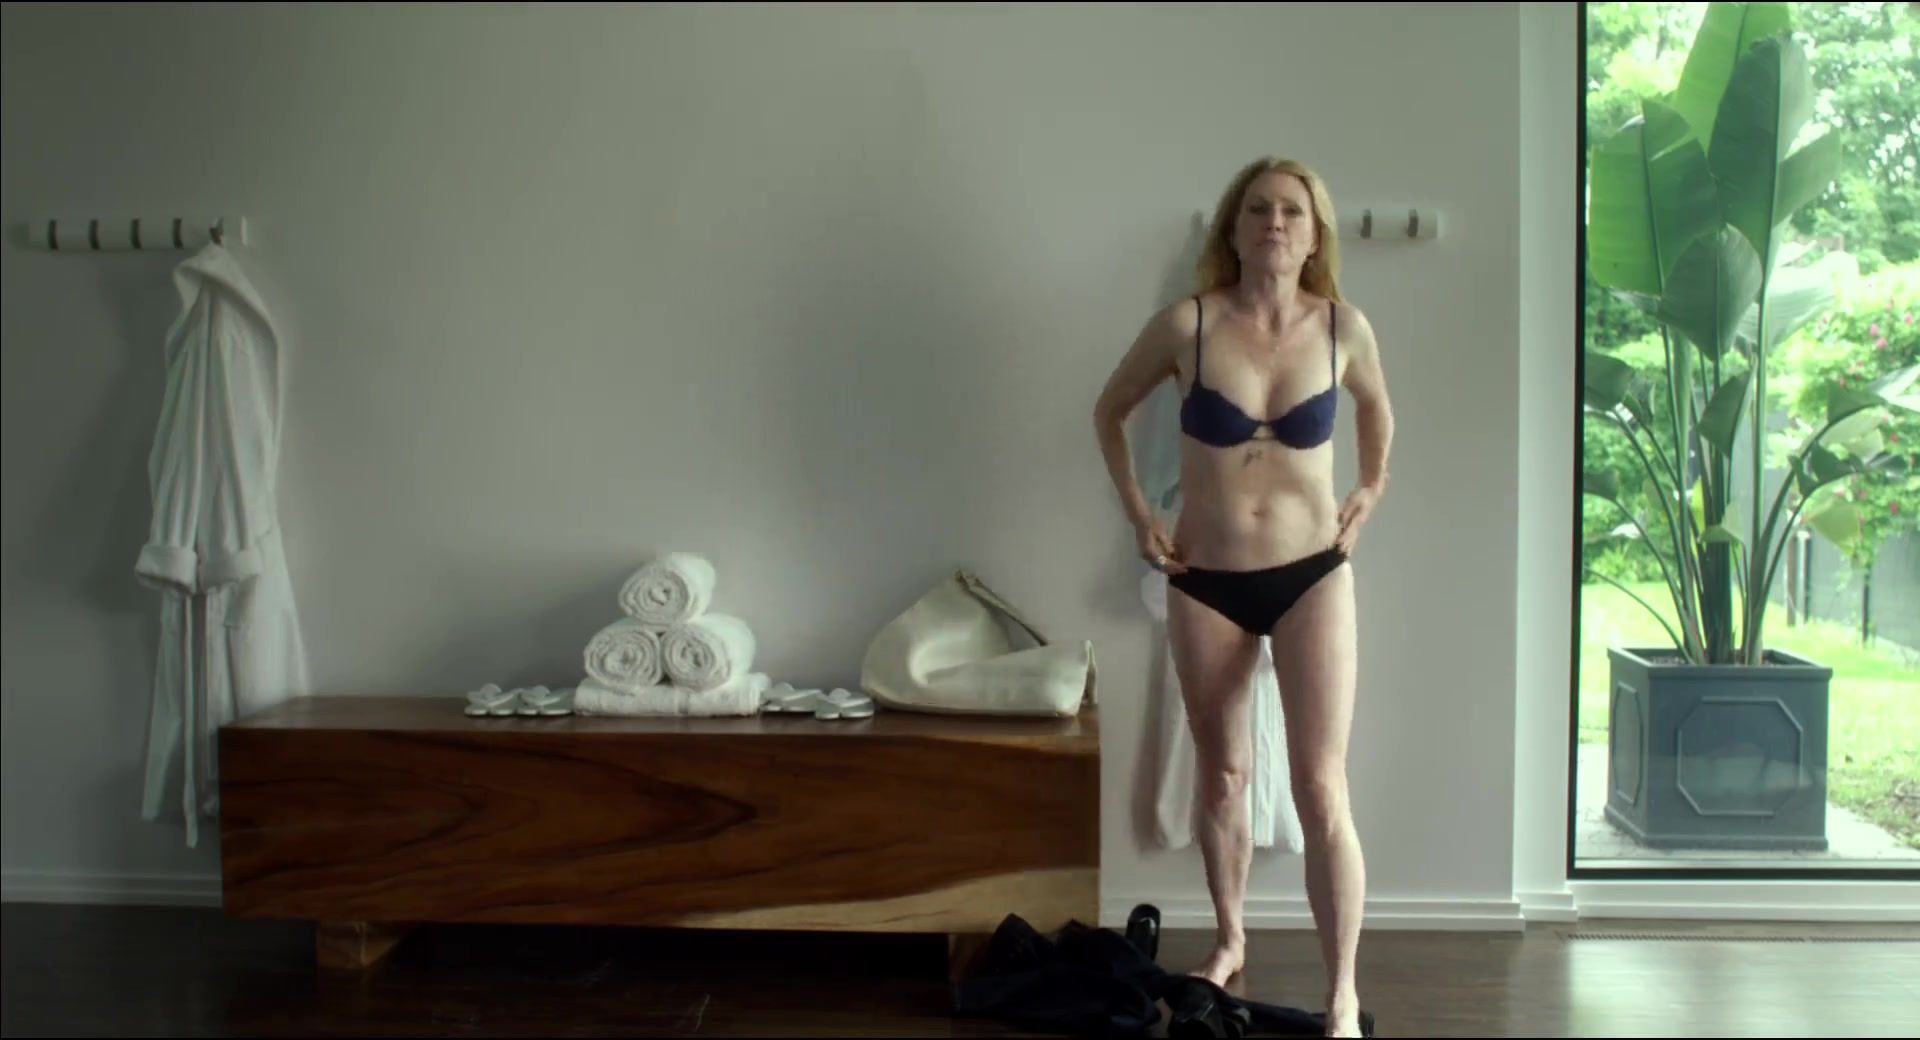 Amateurs Gone Submission video & Lesbian Celebs Scene | Celebrity: Julianne Moore nude | The movie "Maps to the Stars" Pururin - 1